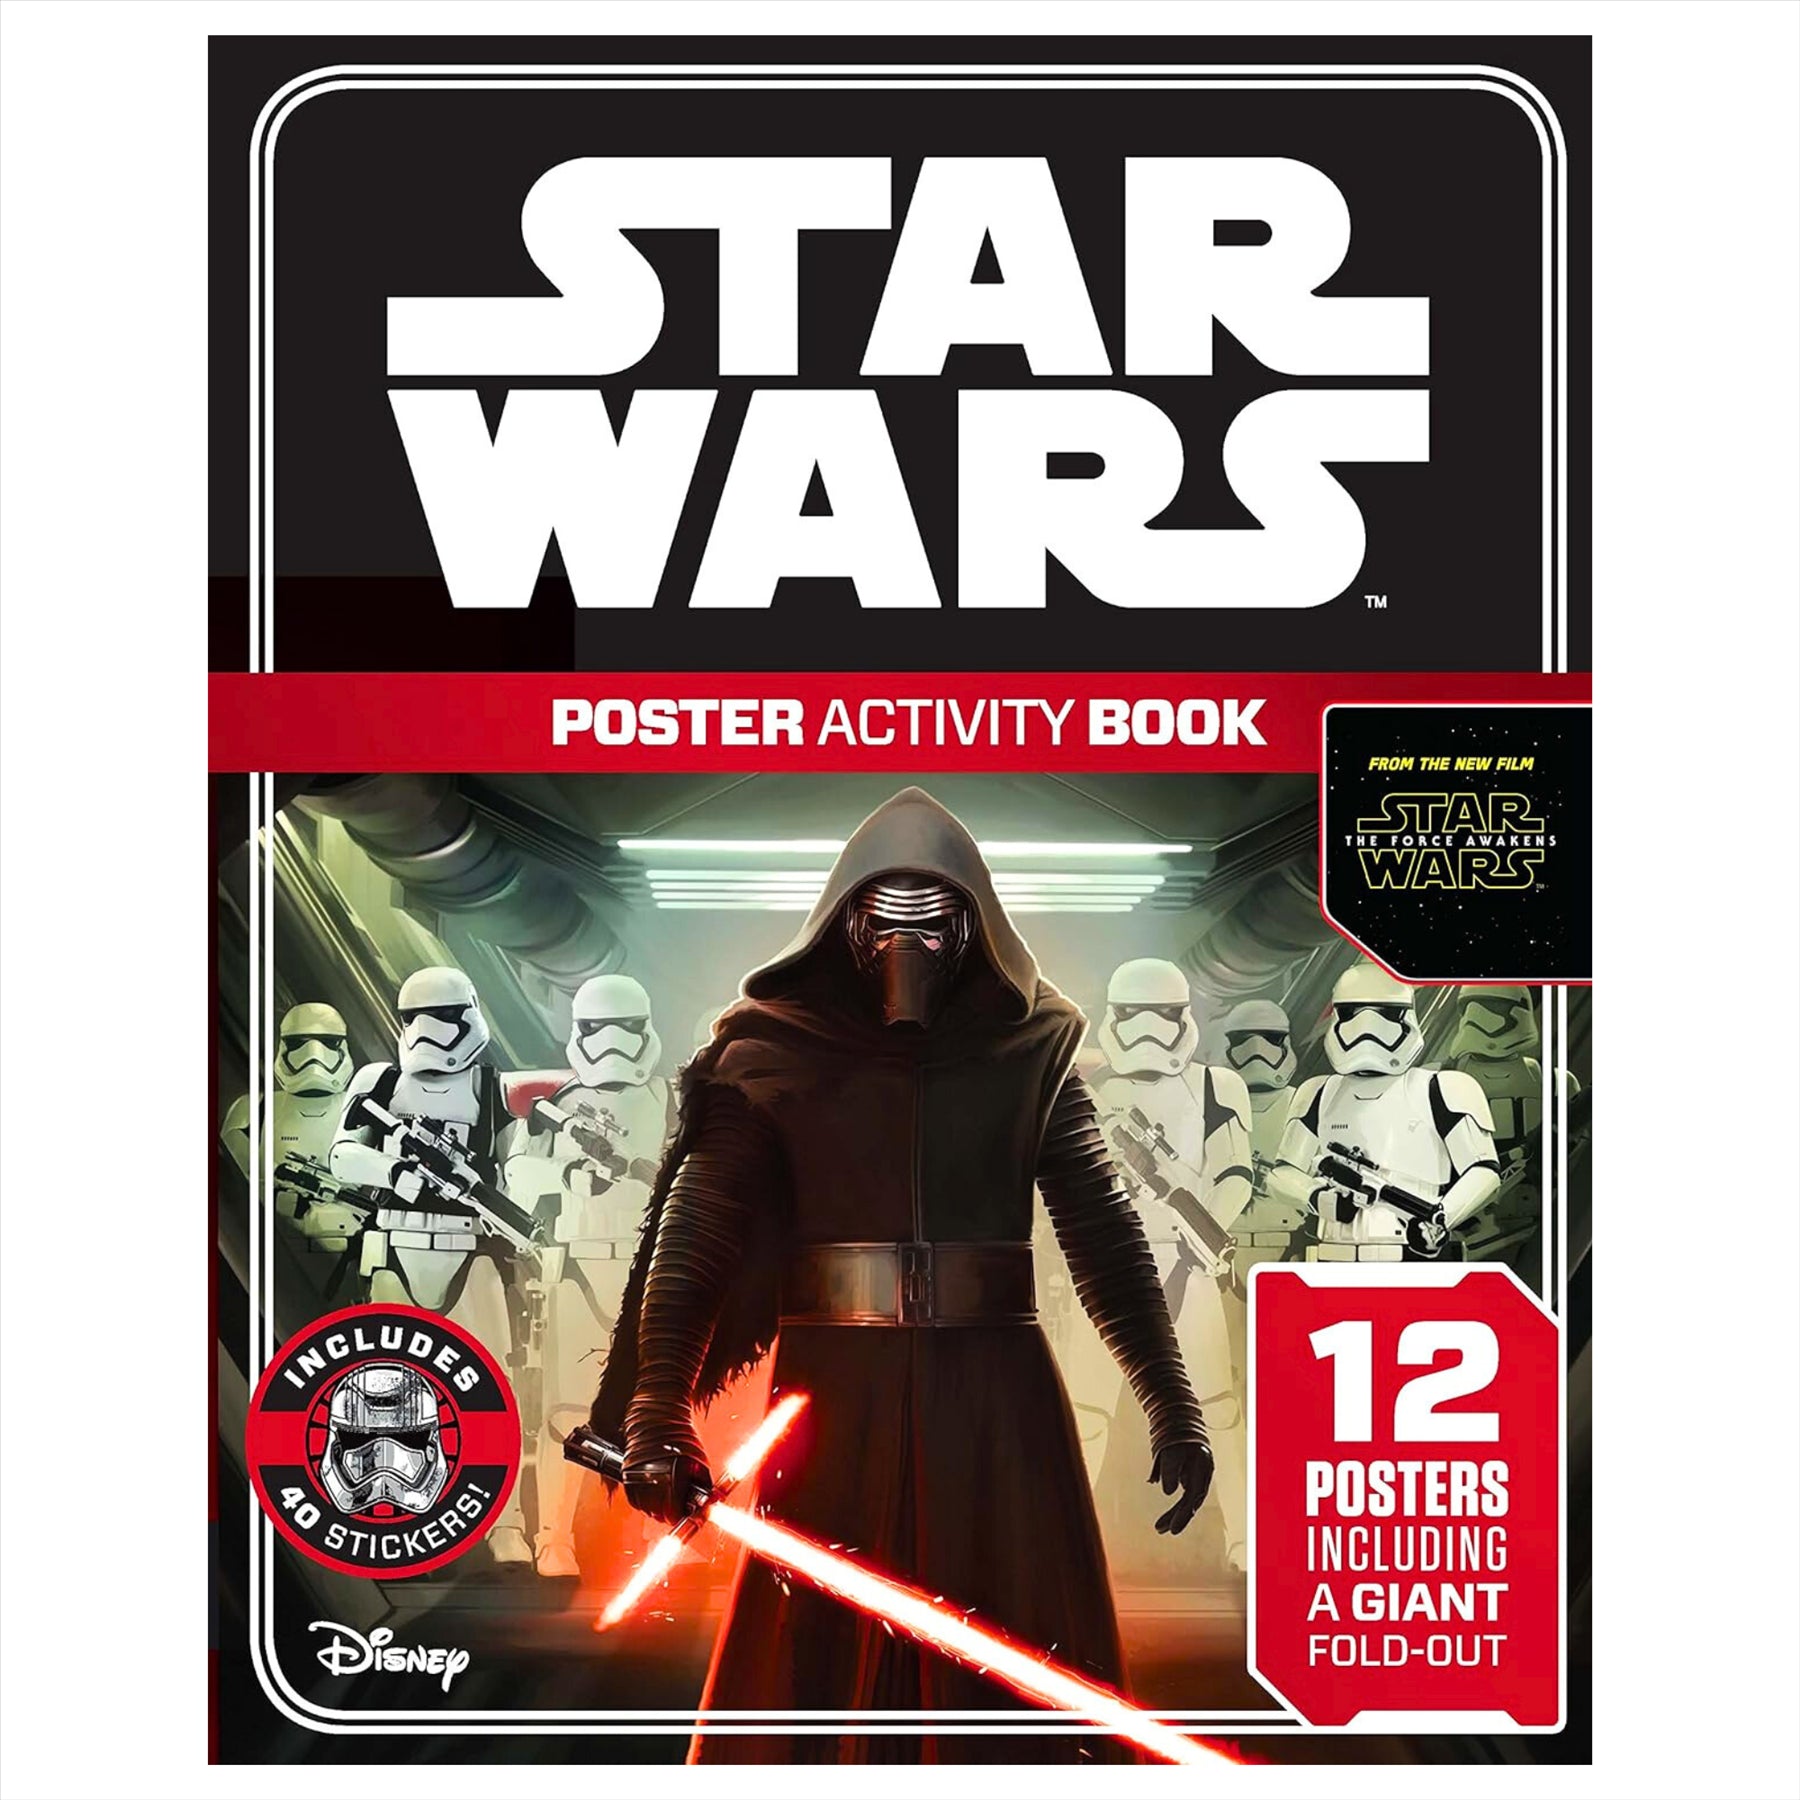 Star Wars The Force Awakens Poster Activity Book - Includes 12 Posters and 40 Stickers - Toptoys2u